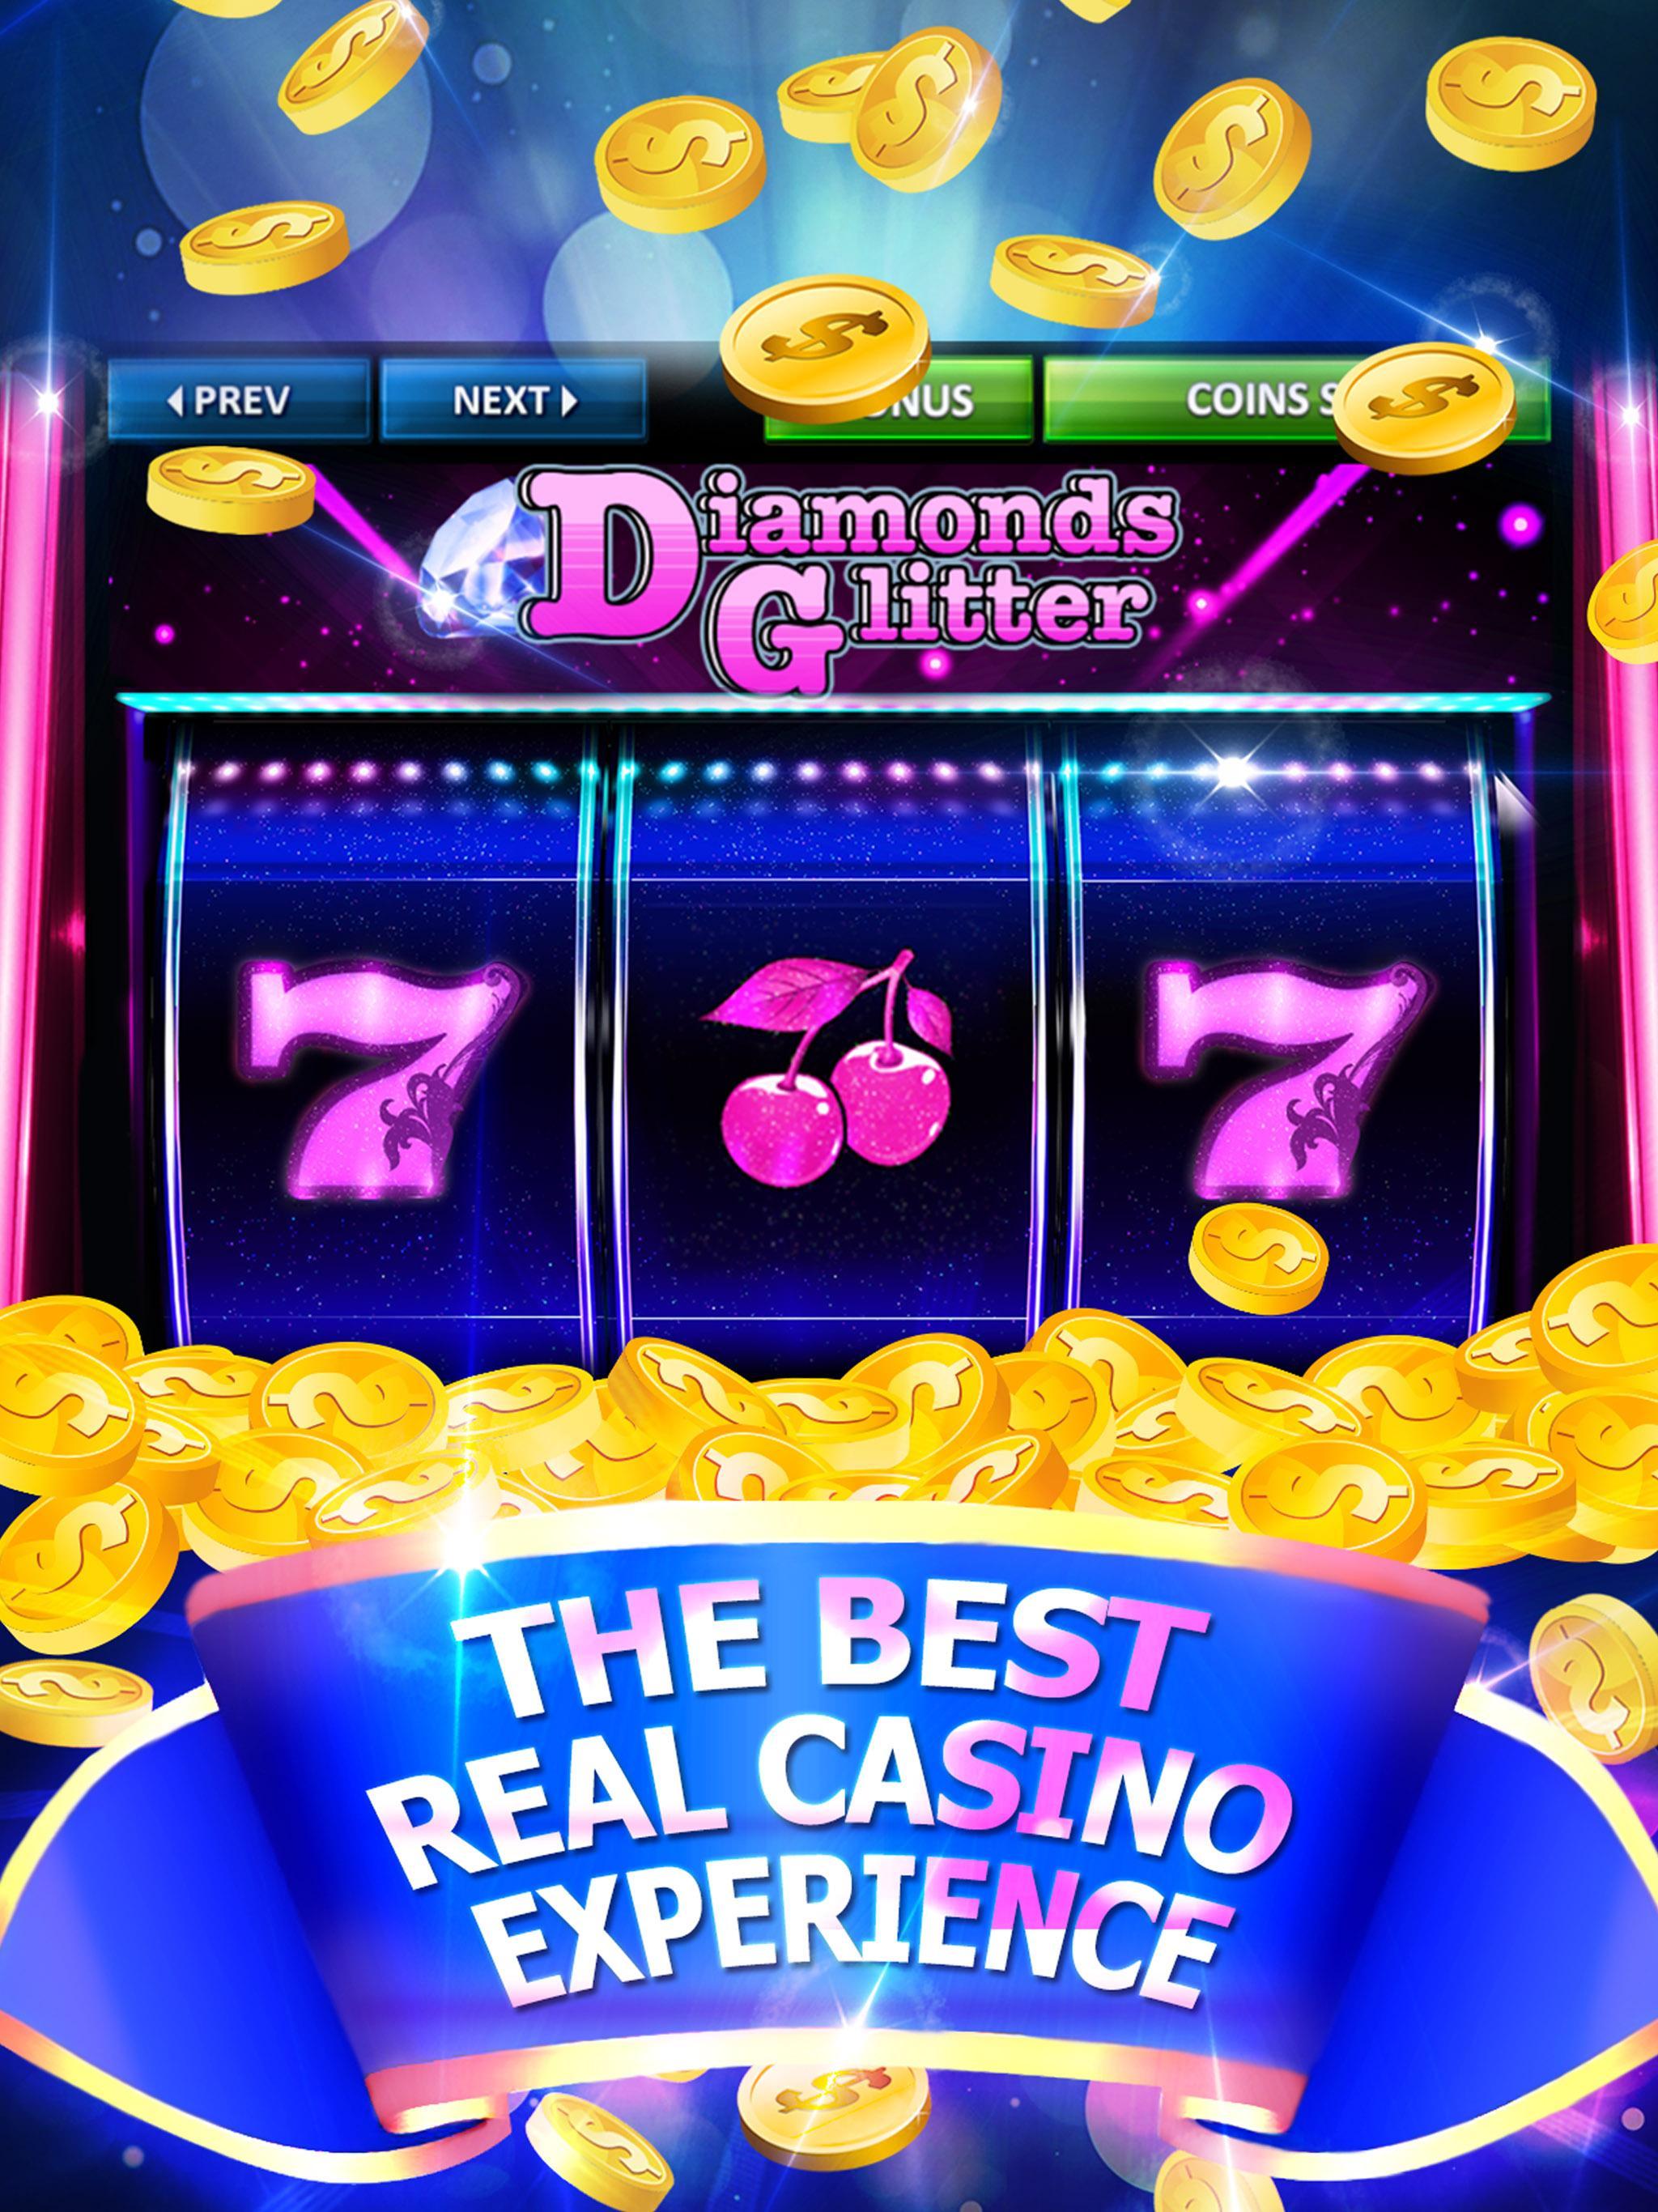 Article Of The Day: Read Everything About Online Slots